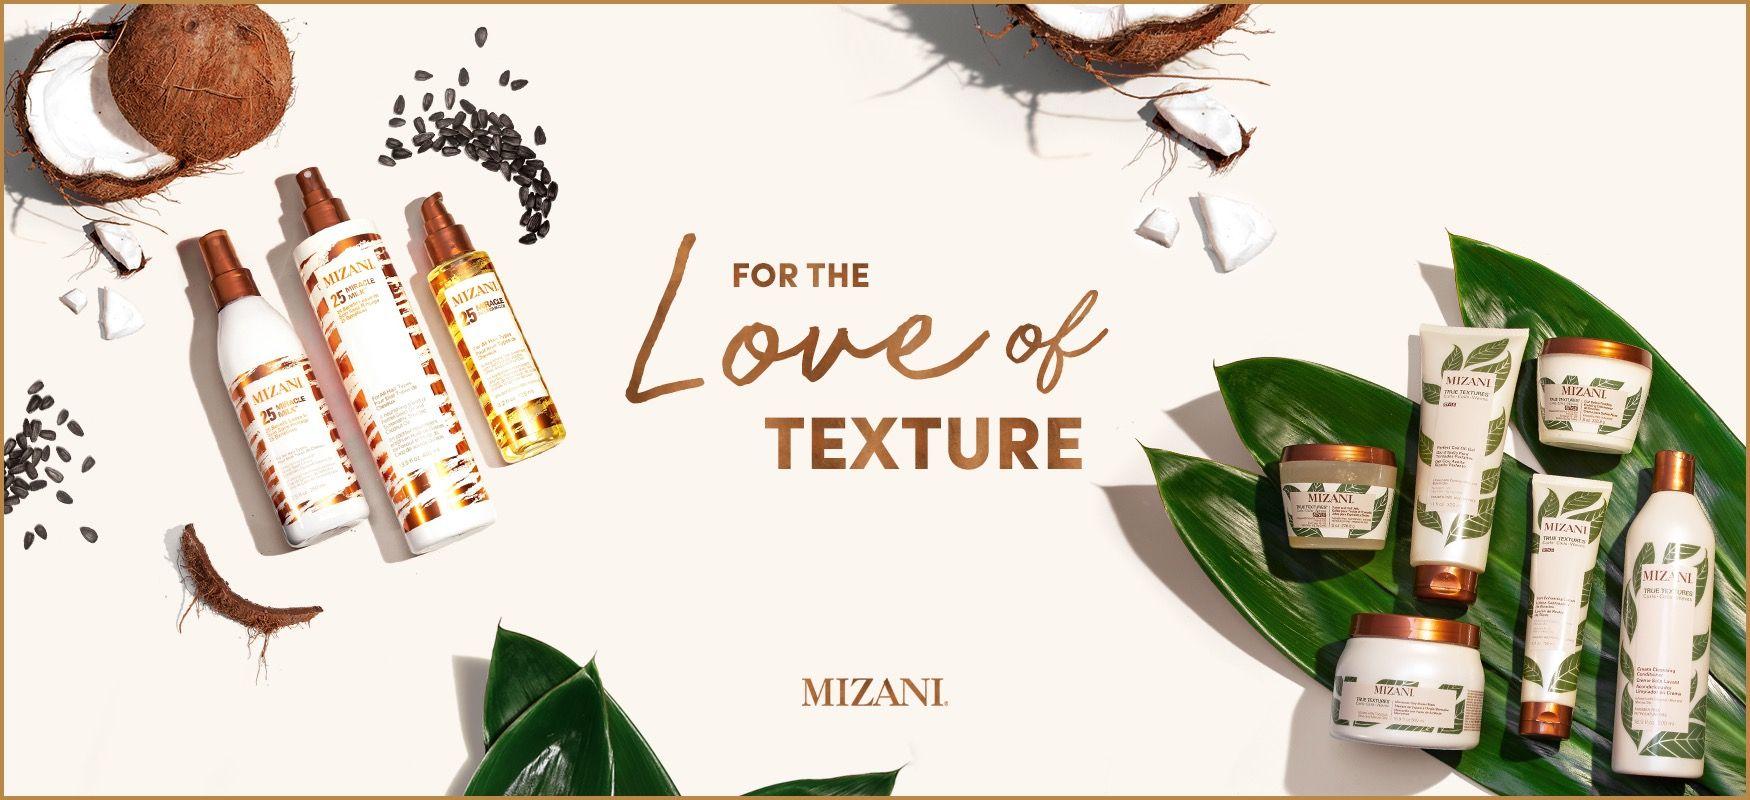 Mizani Logo - Professional Hair Care & Styling Products for All Hair Types | Mizani